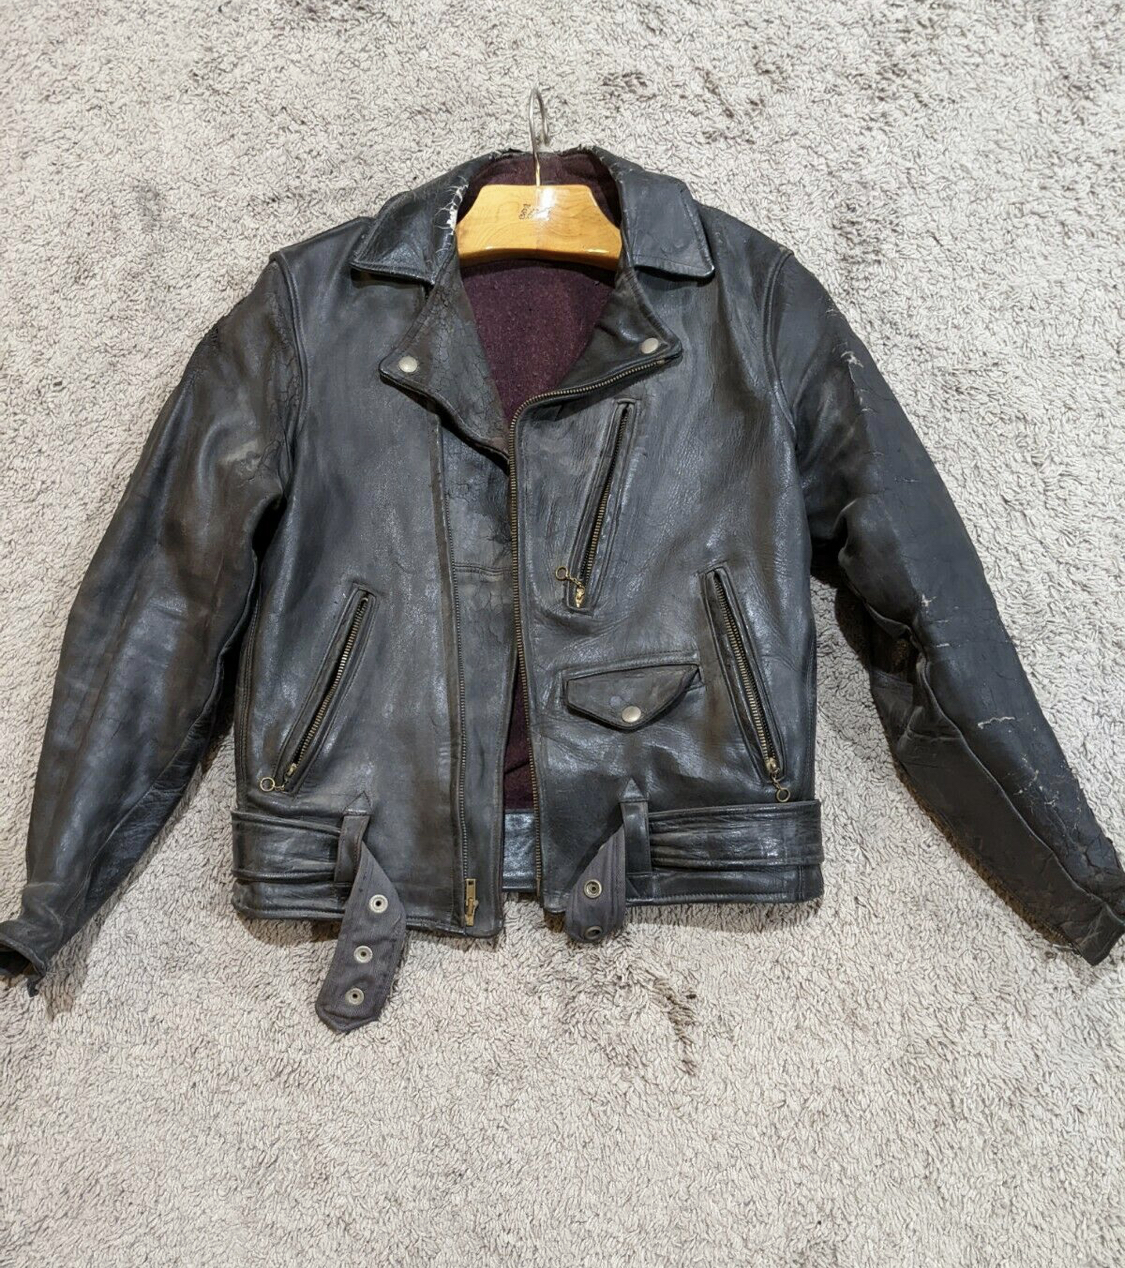 Finds and Deals - Leather Jacket Edition | Page 764 | The Fedora 